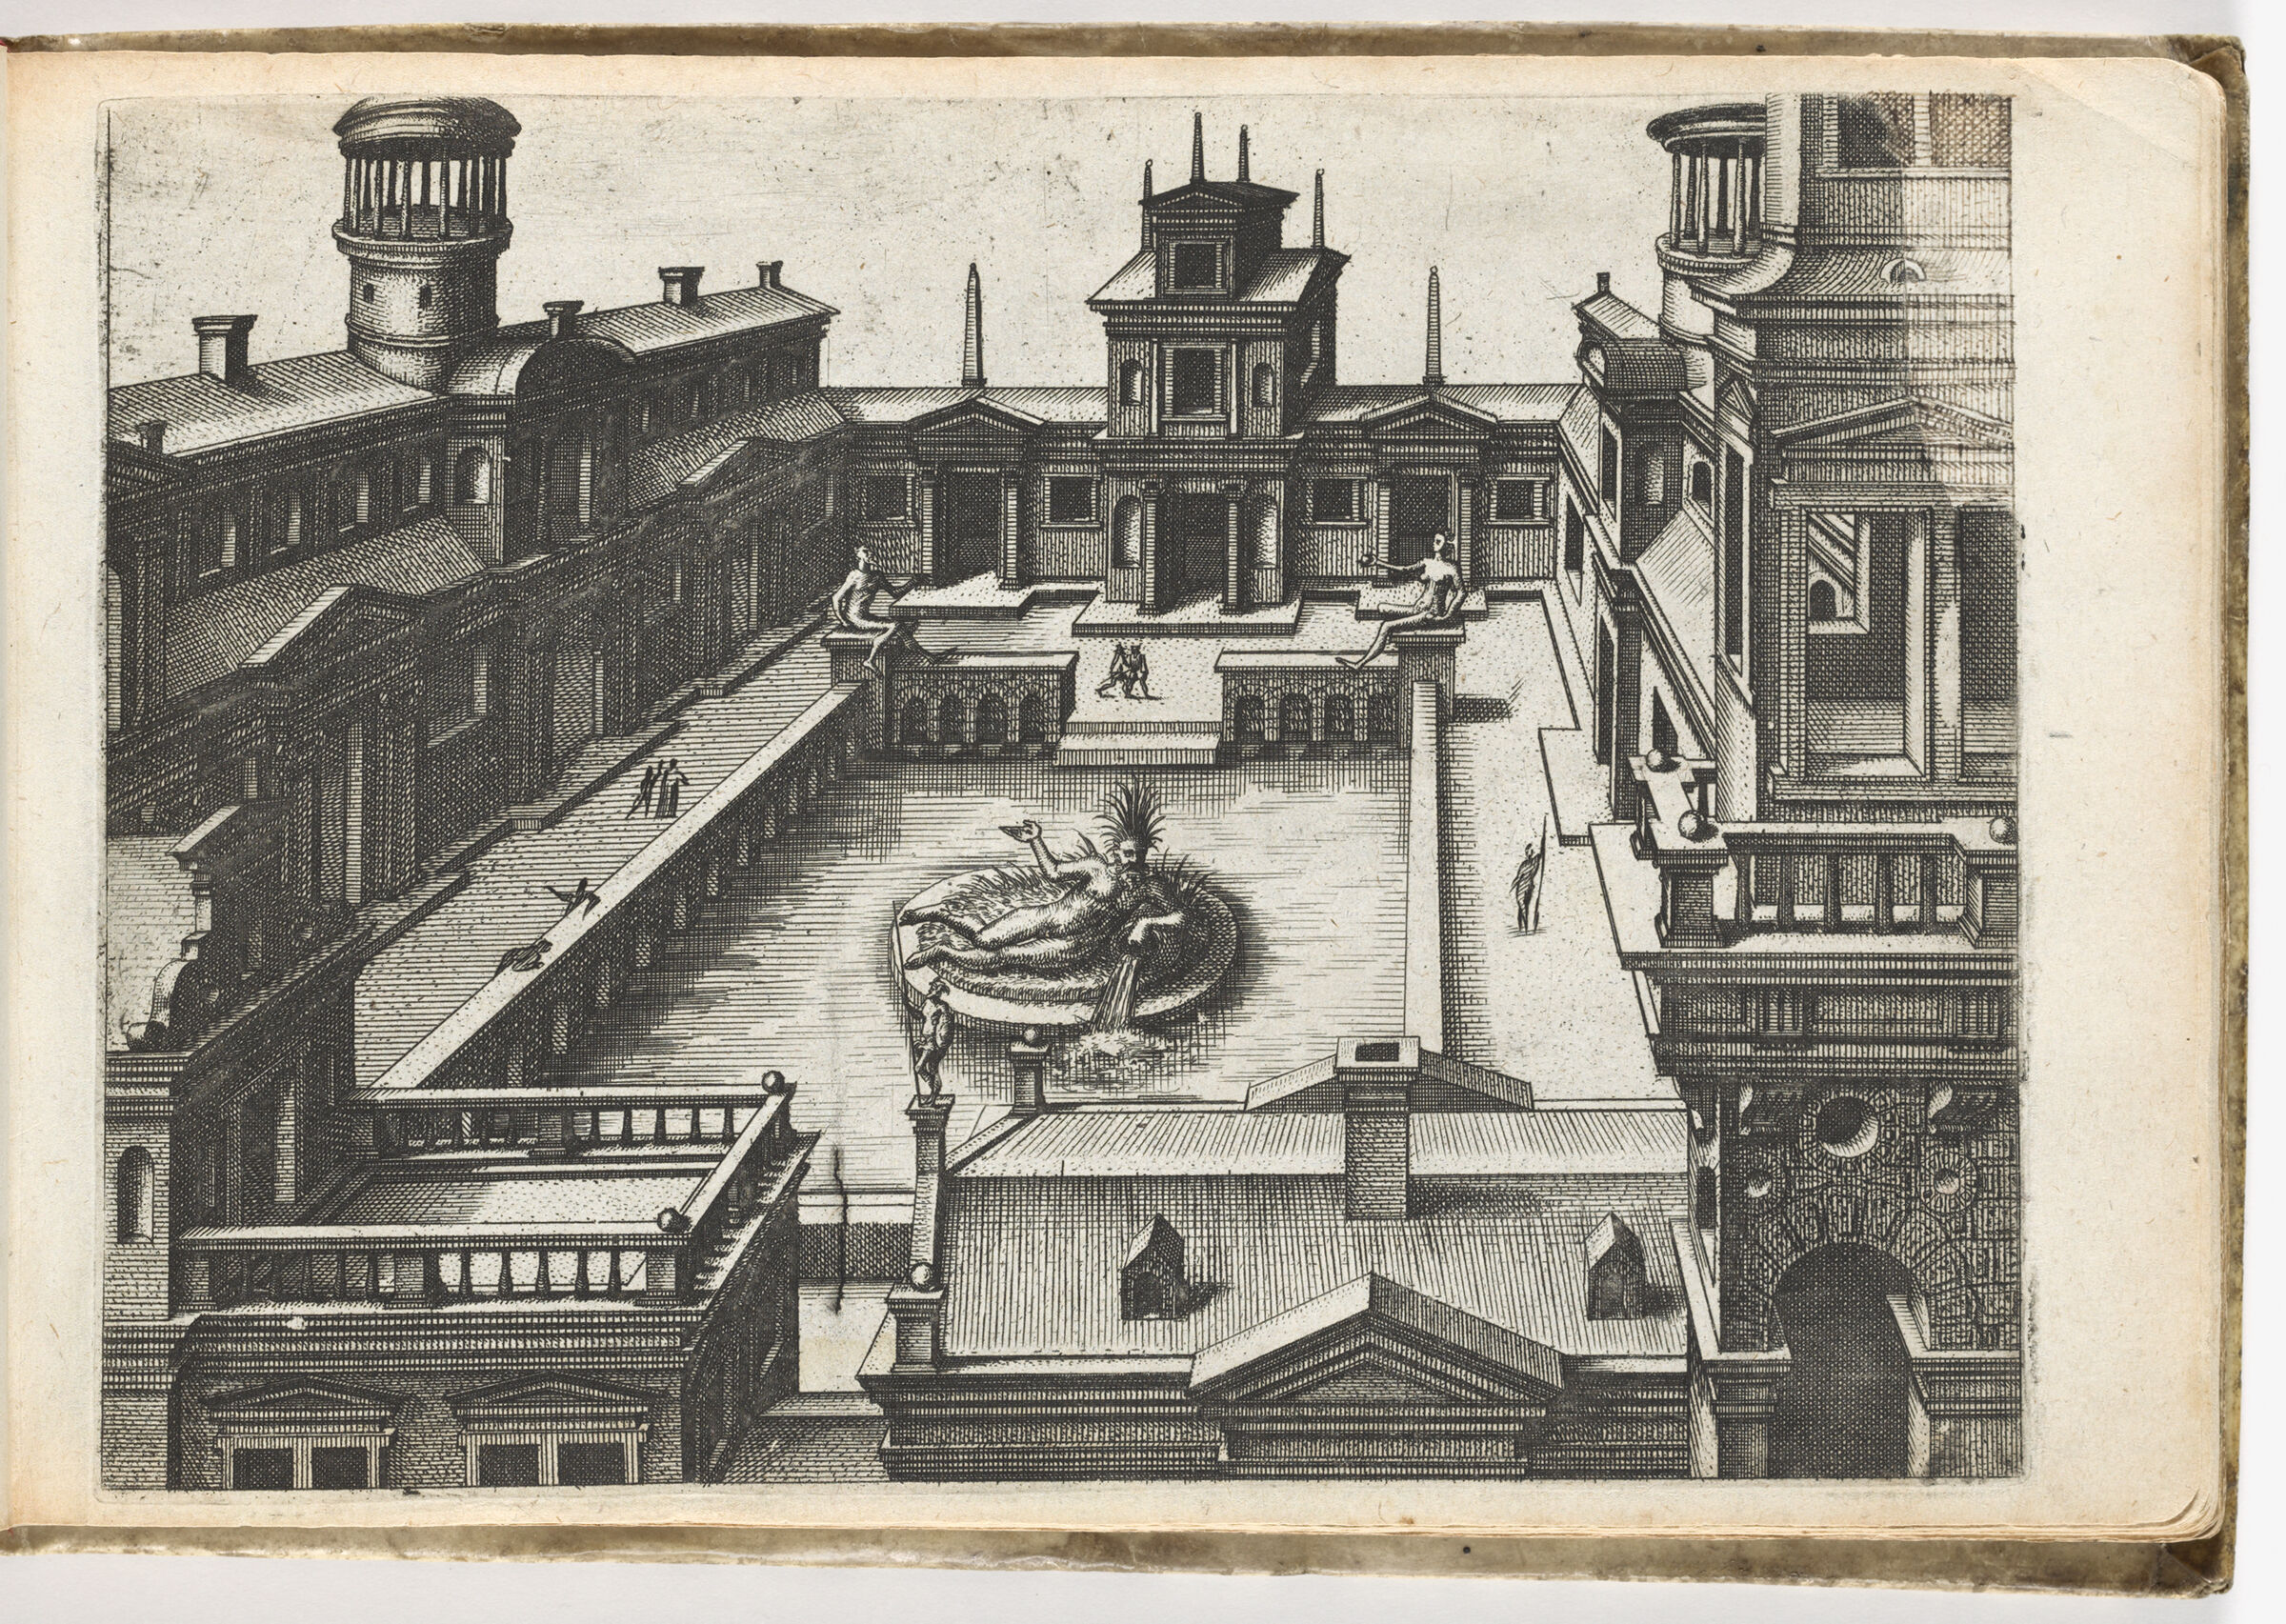 View Into The Courtyard Of A Palace With A Rivergod In The Center Of A Rectangular Pond (N.h.)